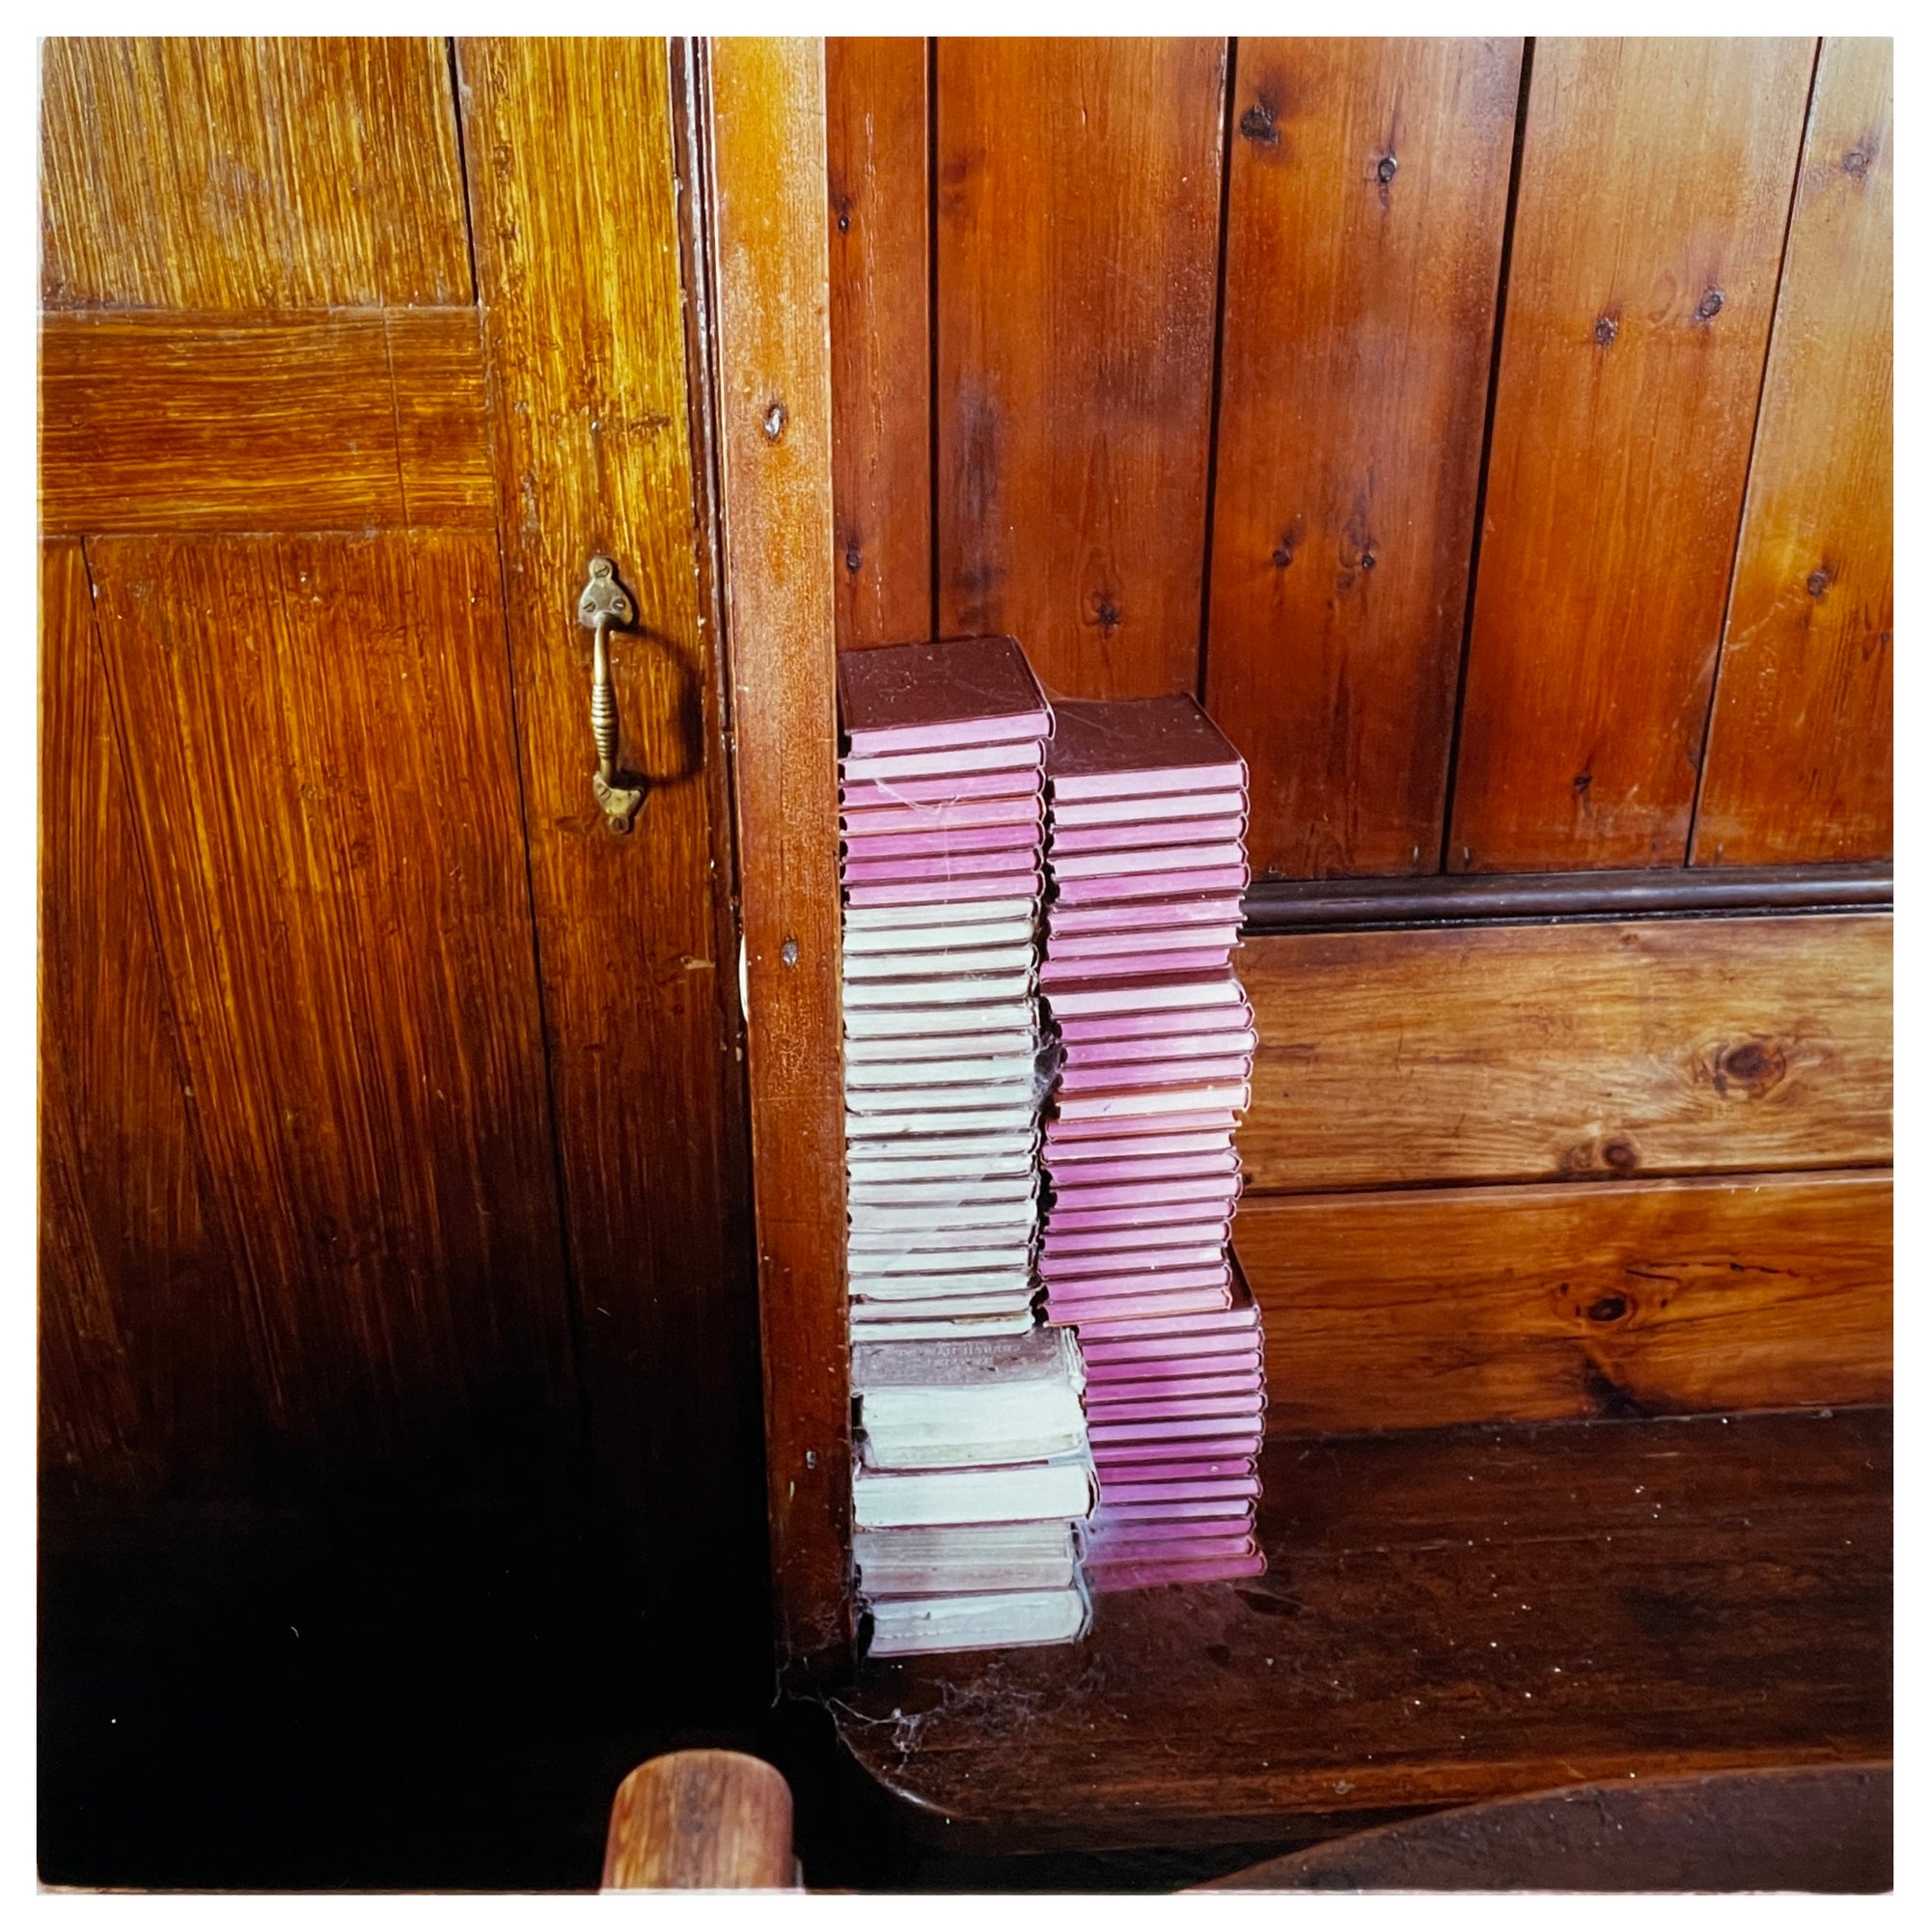 Photograph by Richard Heeps.  Stacked up in the corner of a wooden pew next to a wooden door is two columns of hymn books.  The hymn books are red hard back some with white paper edging and some with pink.